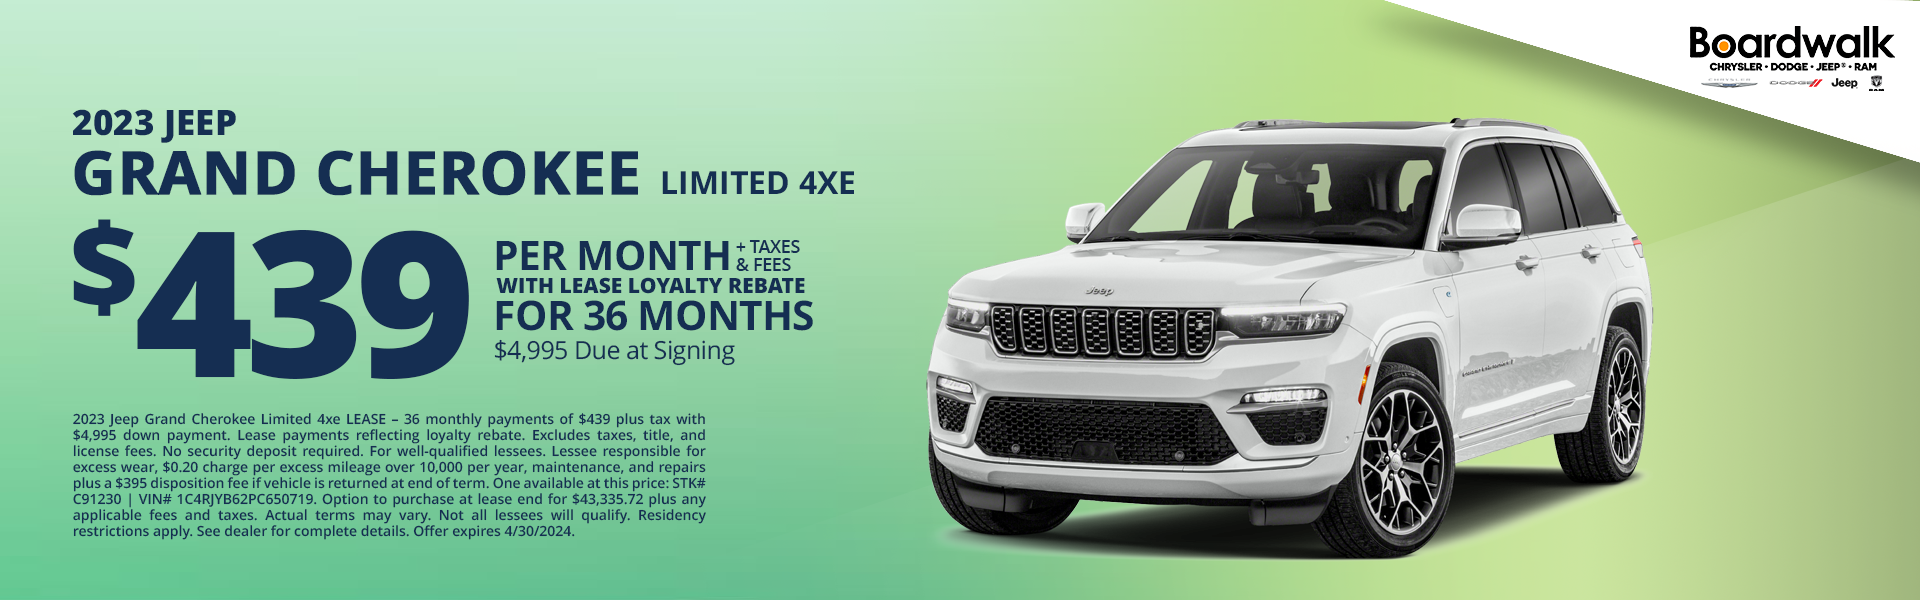 2023 Jeep Grand Cherokee Limited 4XE $439 per month lease